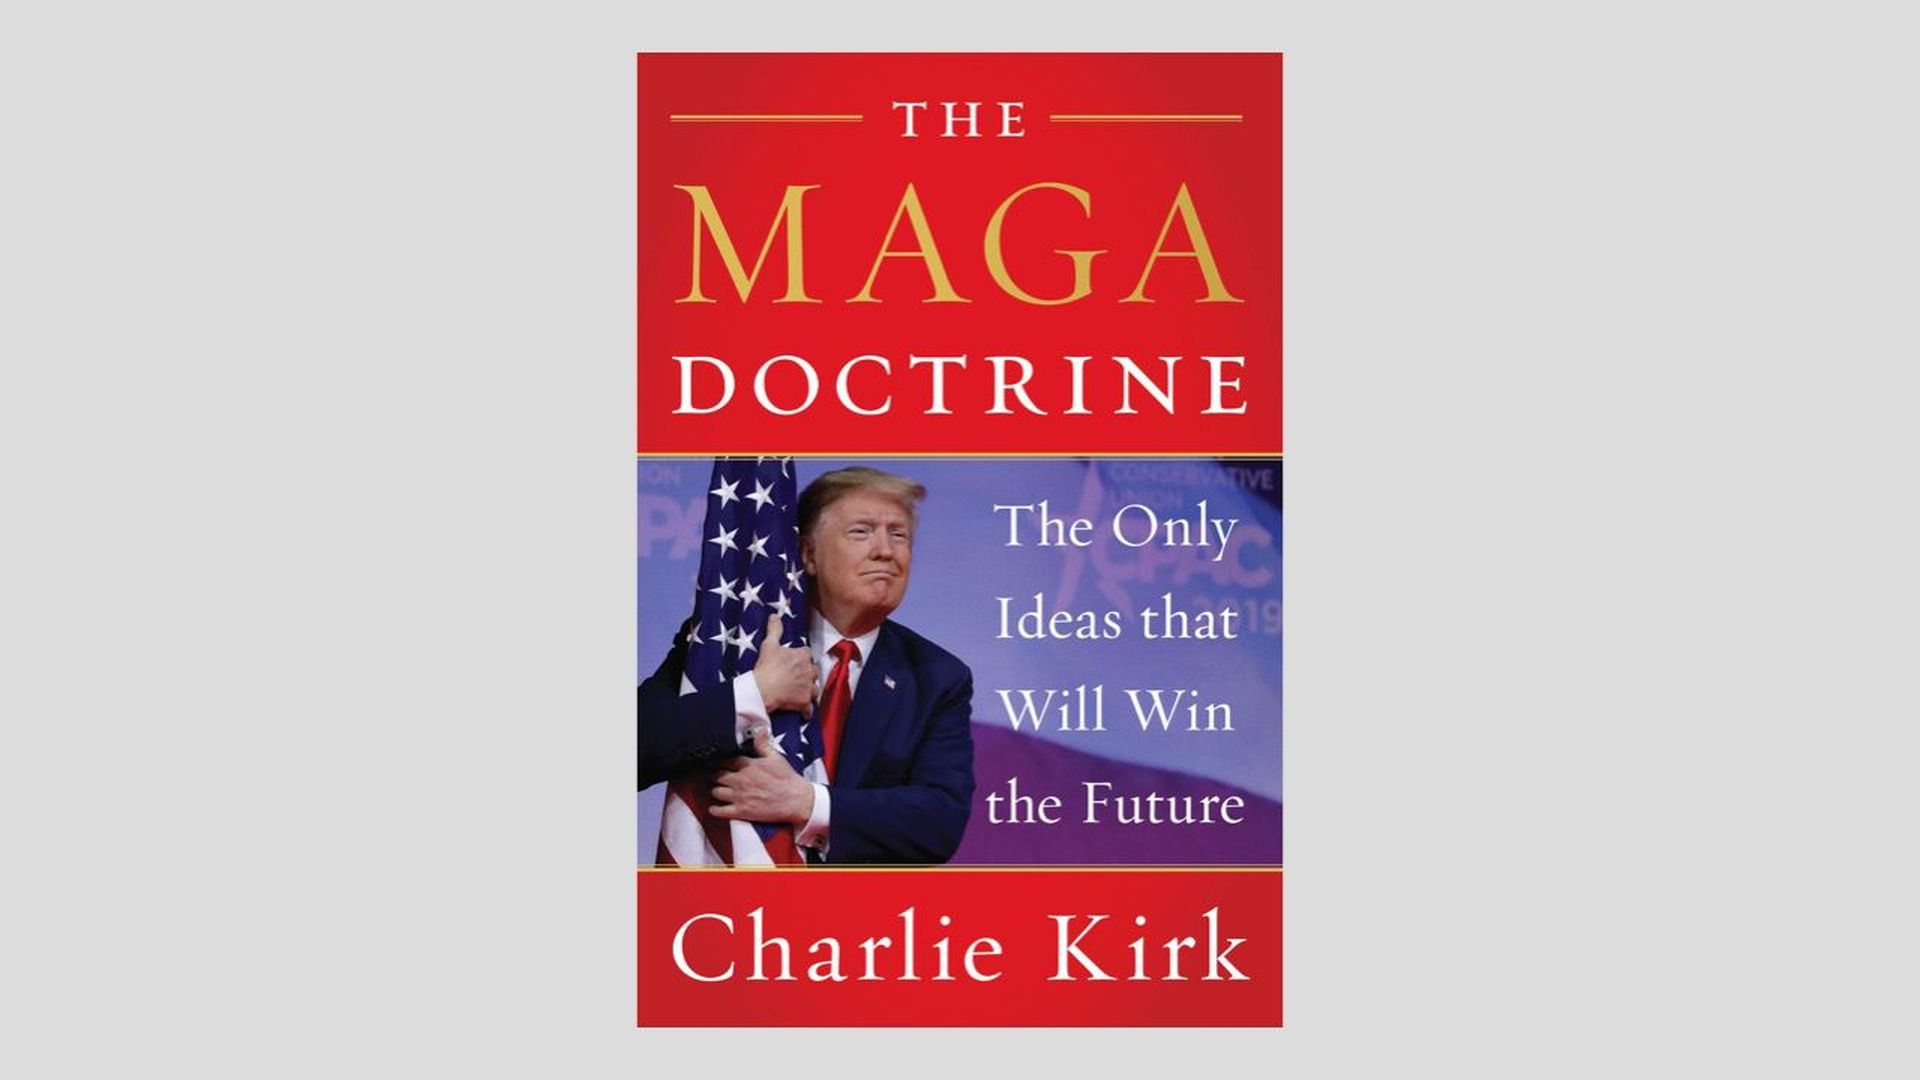 The cover of "The MAGA Doctrine" by Charlie Kirk